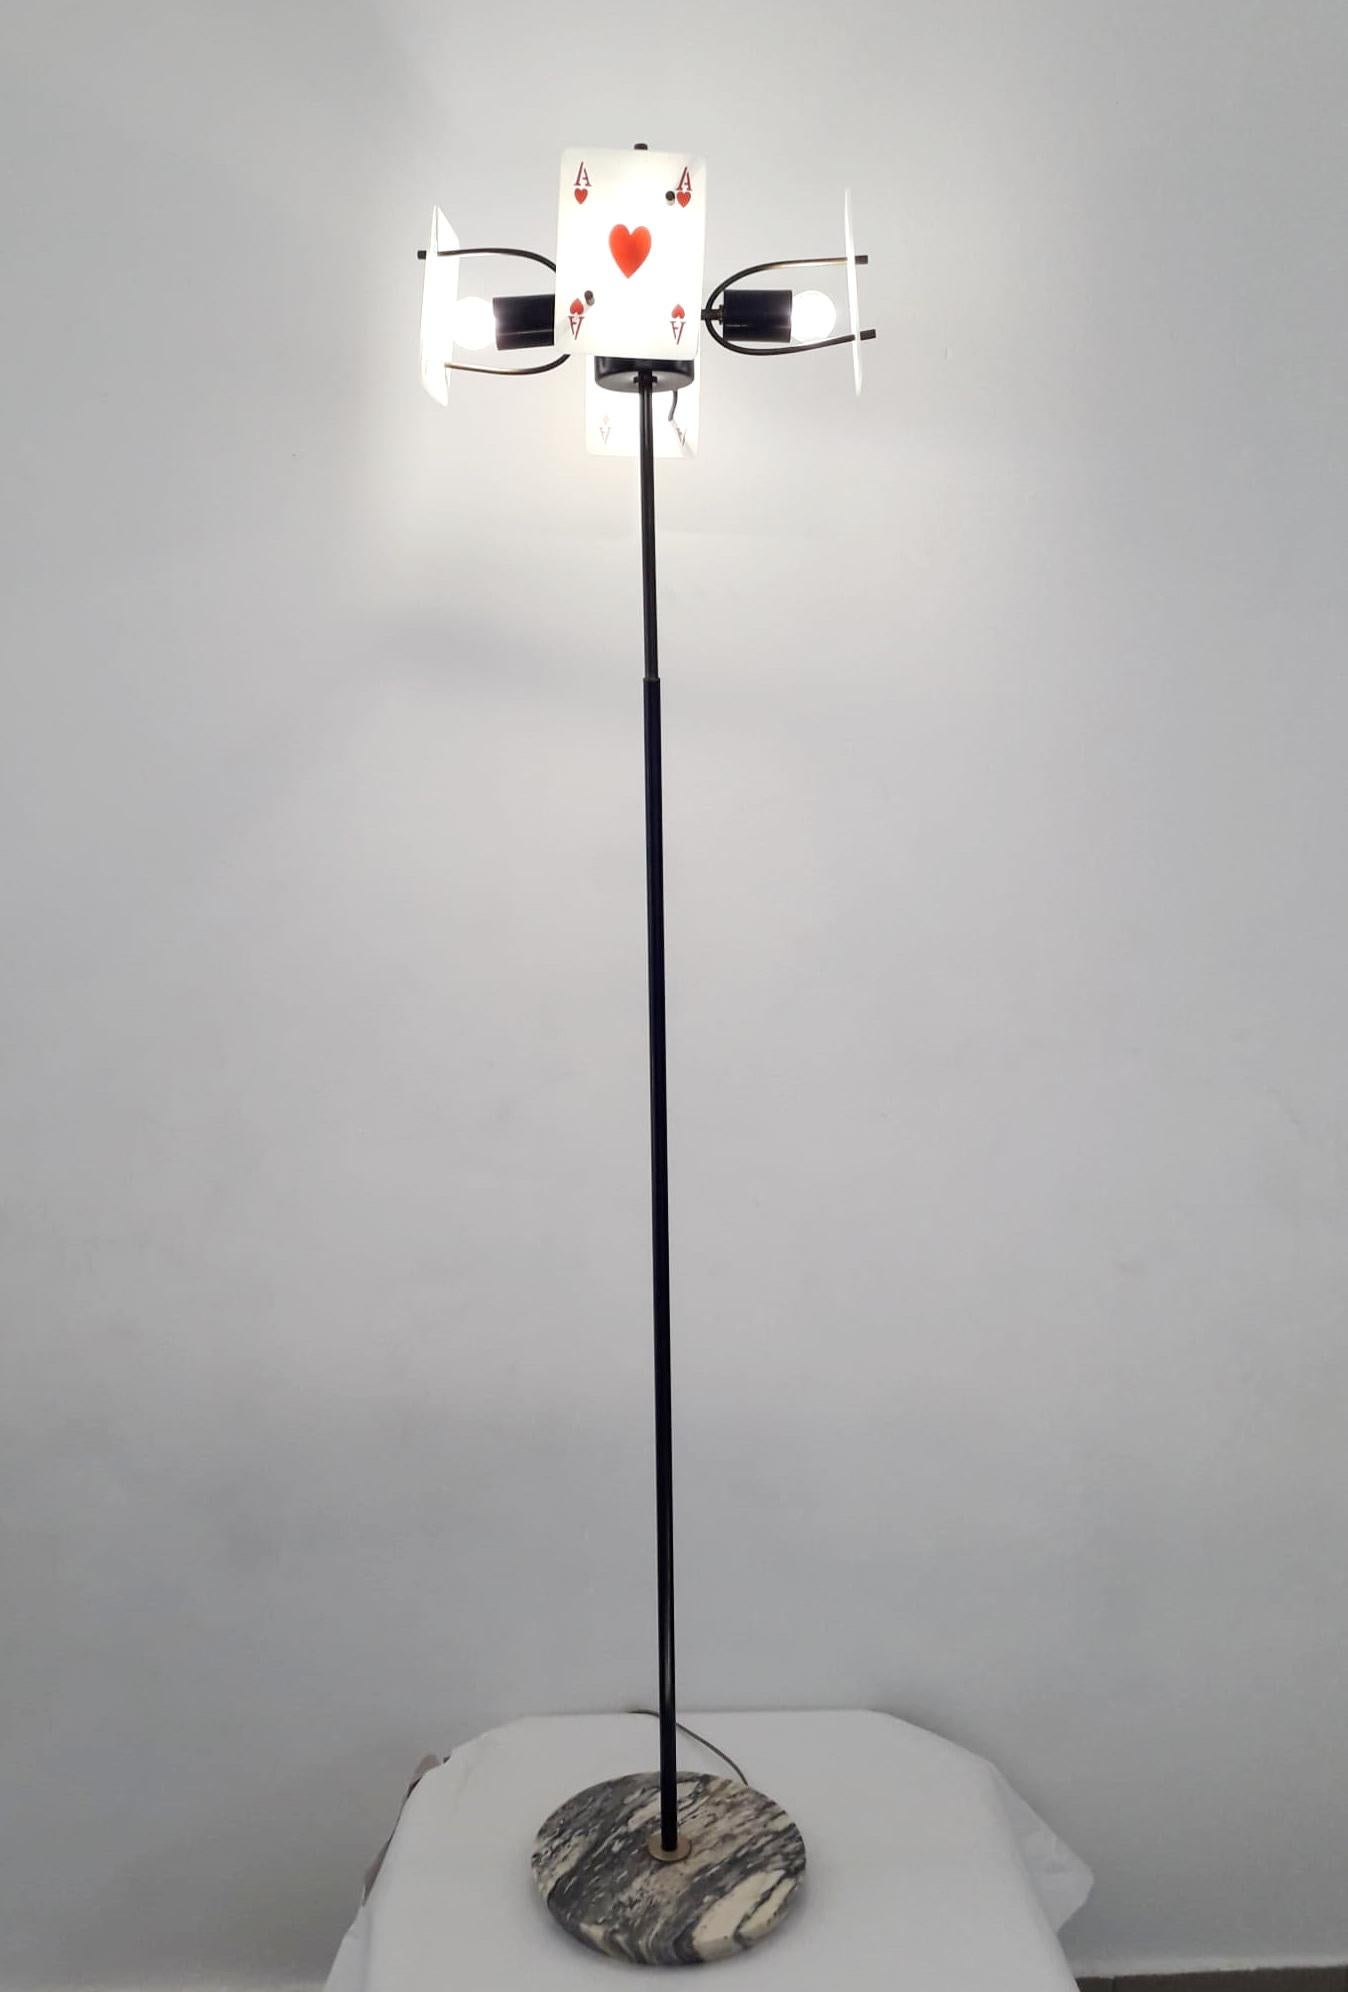 Rare vintage Italian midcentury floor lamp with 4 poker glass diffusers mounted on black metal frame and marble base, made in Italy, circa 1960s
Measures: Height 67 inches, top diameter 17 inches, marble base diameter 11 inches
4-light / E12 or E14